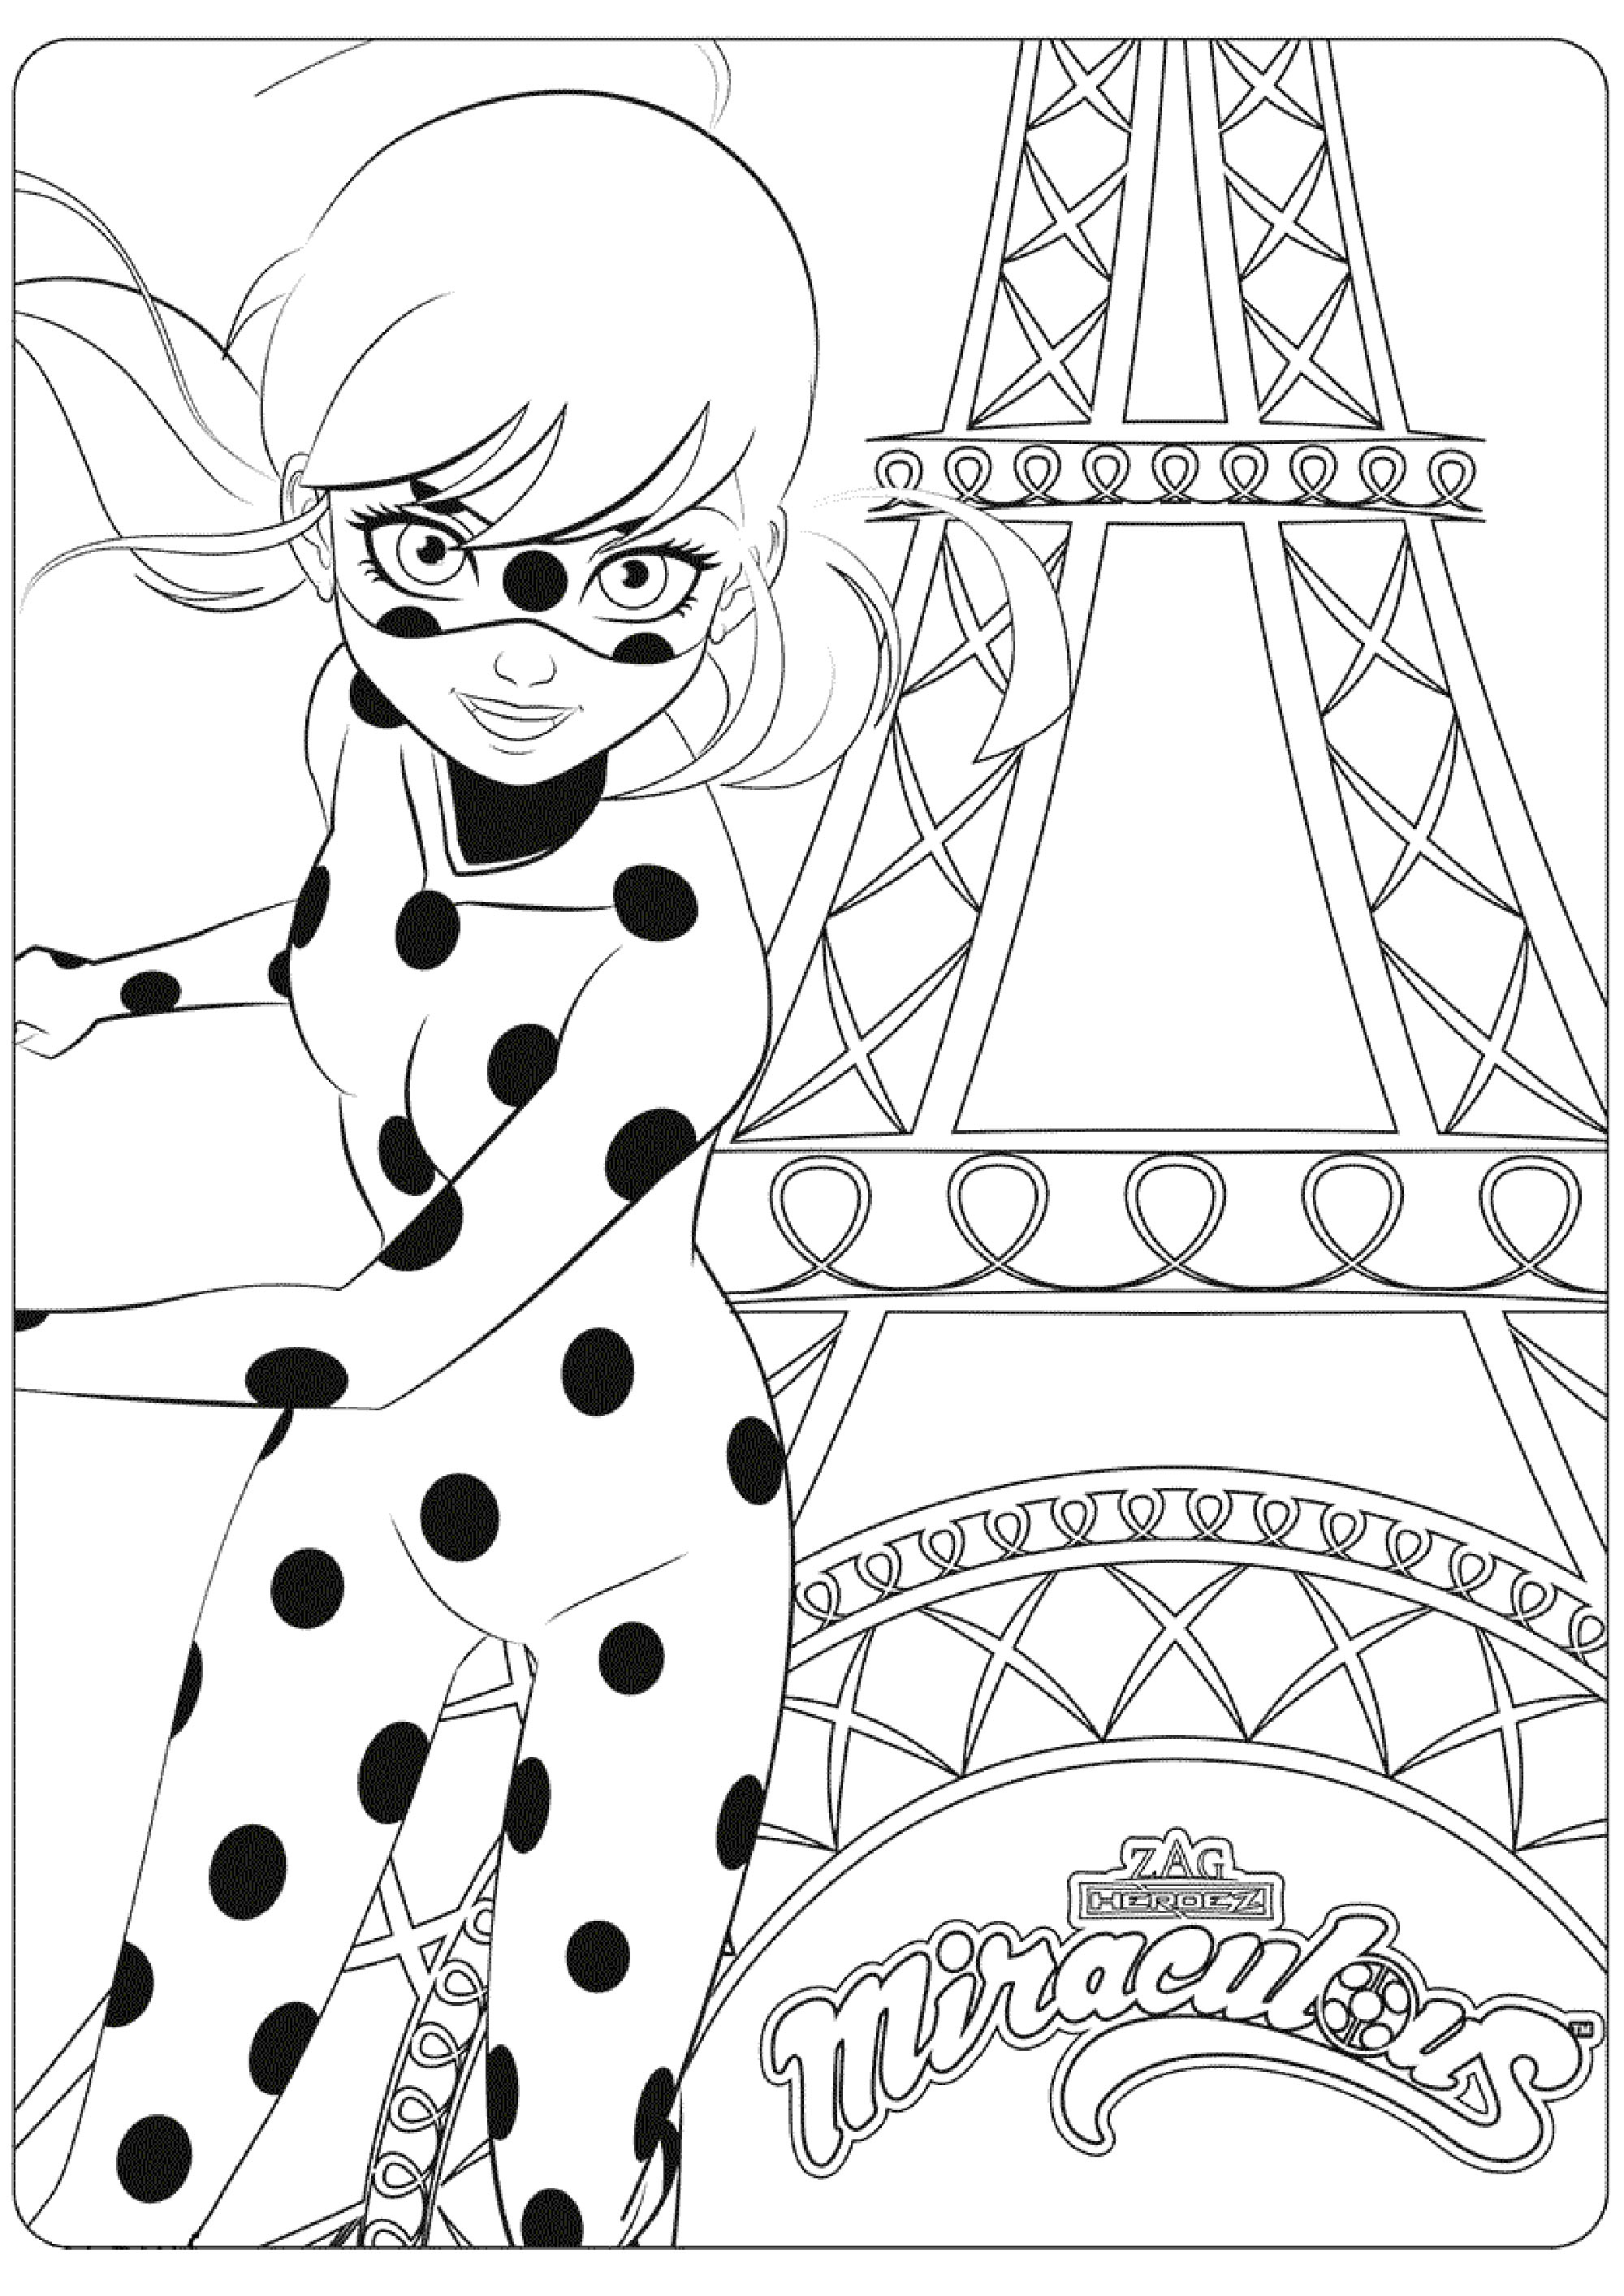 miraculous-lady-bug-free-to-color-for-children-miraculous-ladybug-kids-coloring-pages